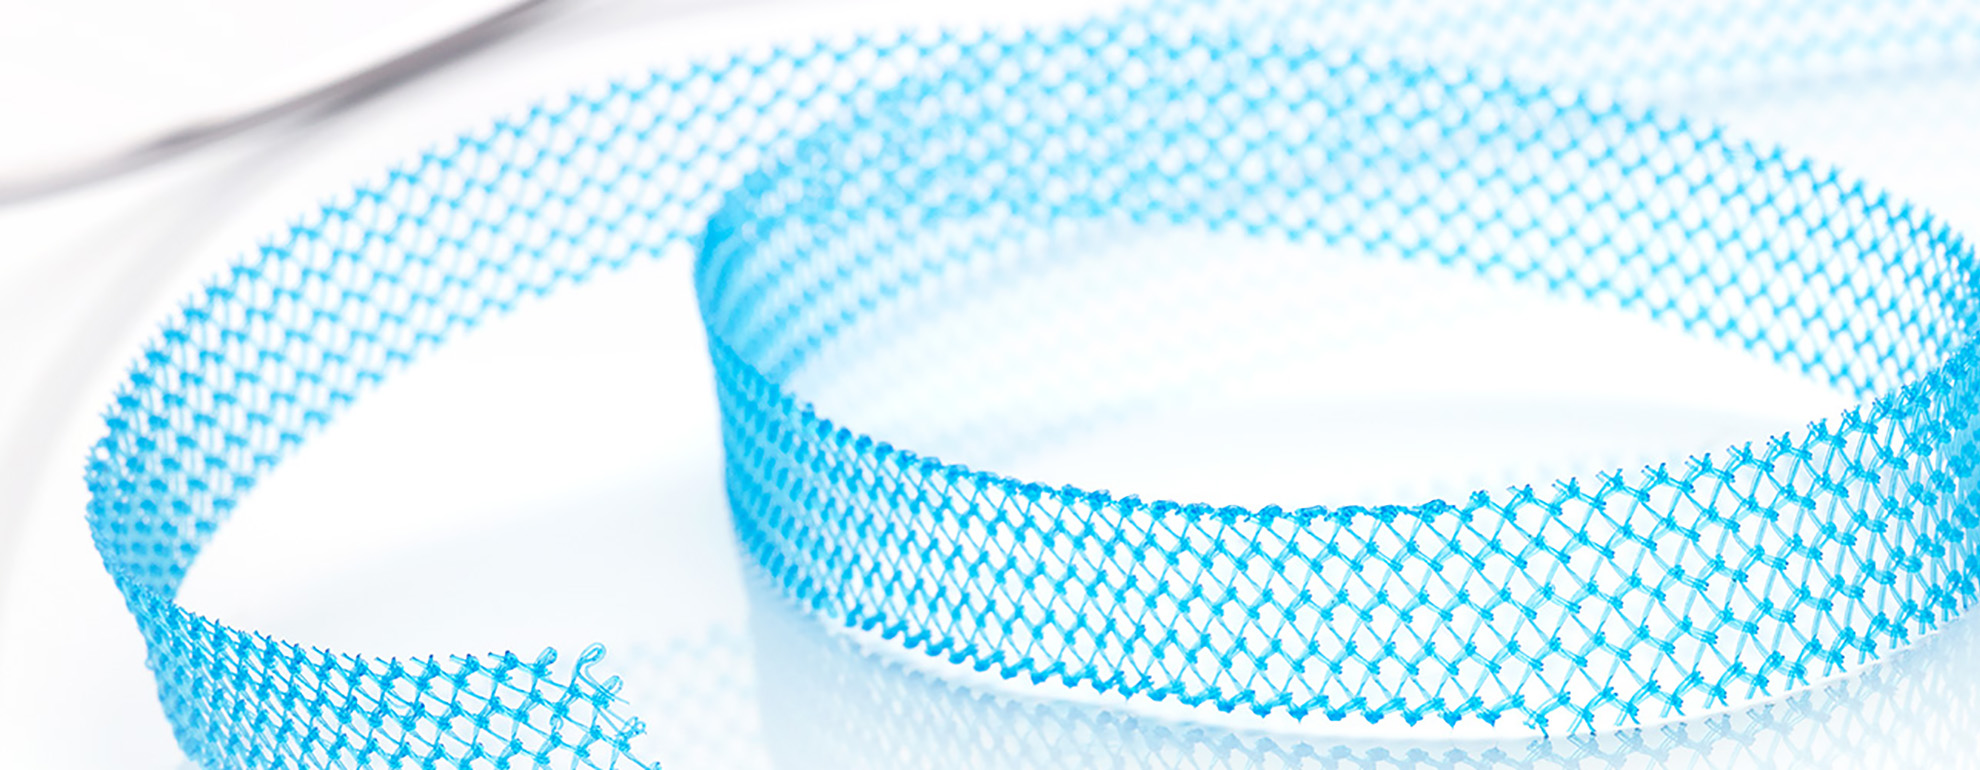 Introducing "Blue". Mid-urethral Sling Portfolio with Advantage™ Blue Mesh. Improved visibility. Clinically proven.